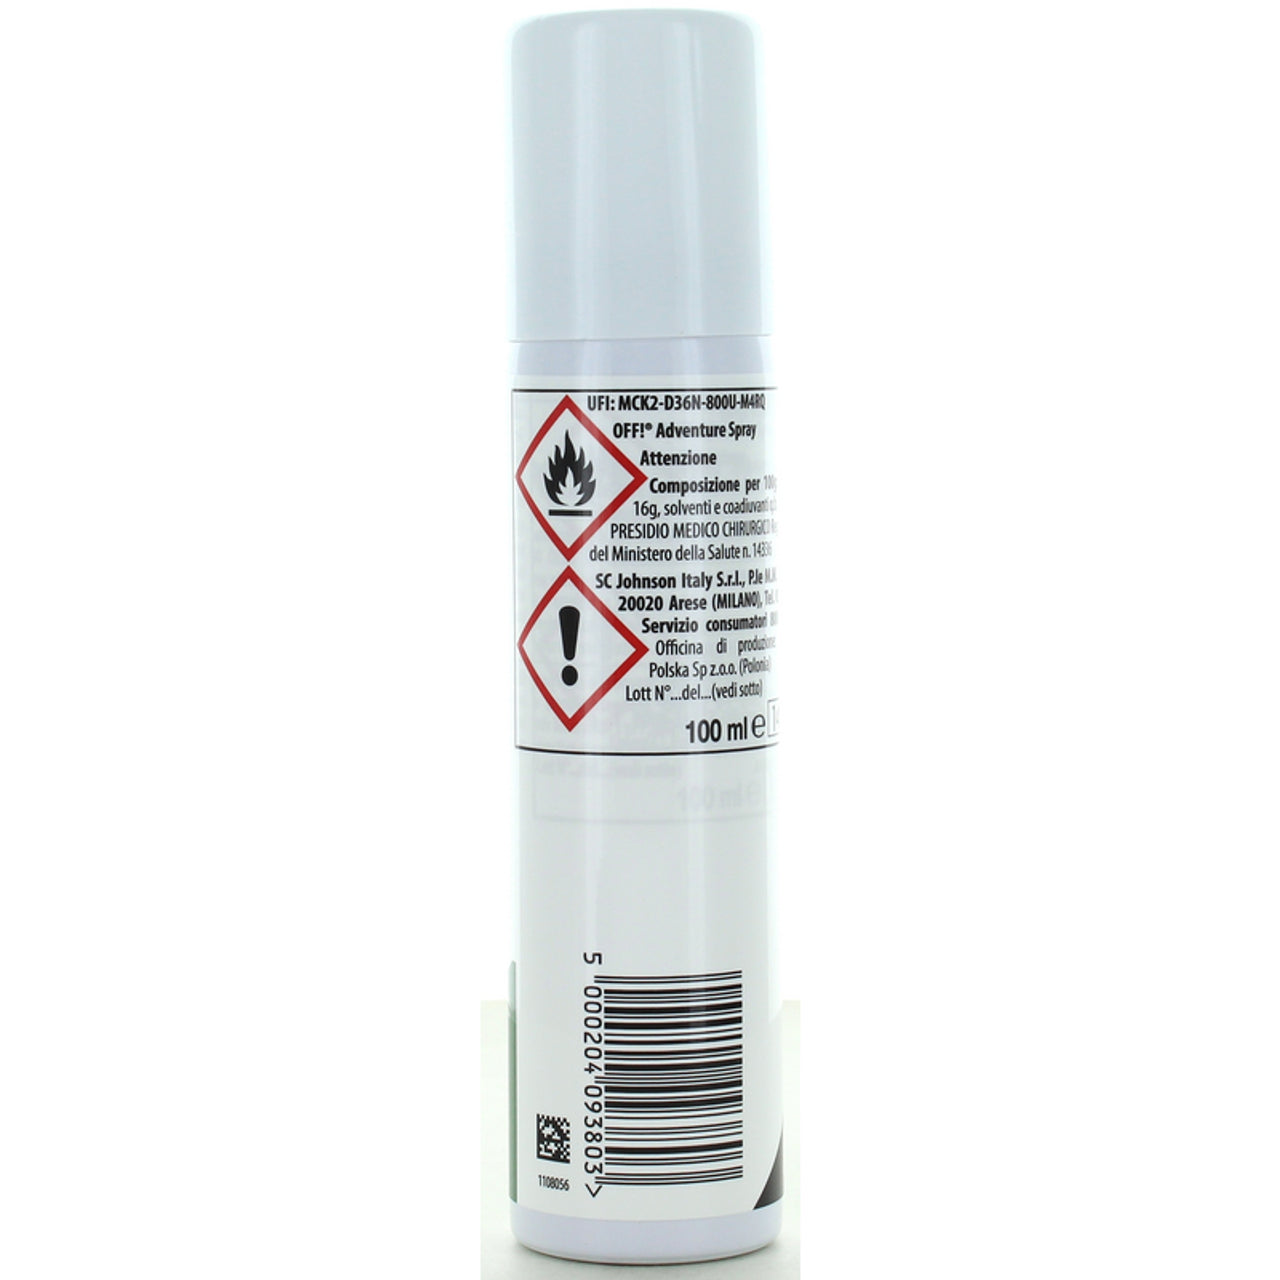 Off! Adventure Insect SPARY REPARAGE 100 ml